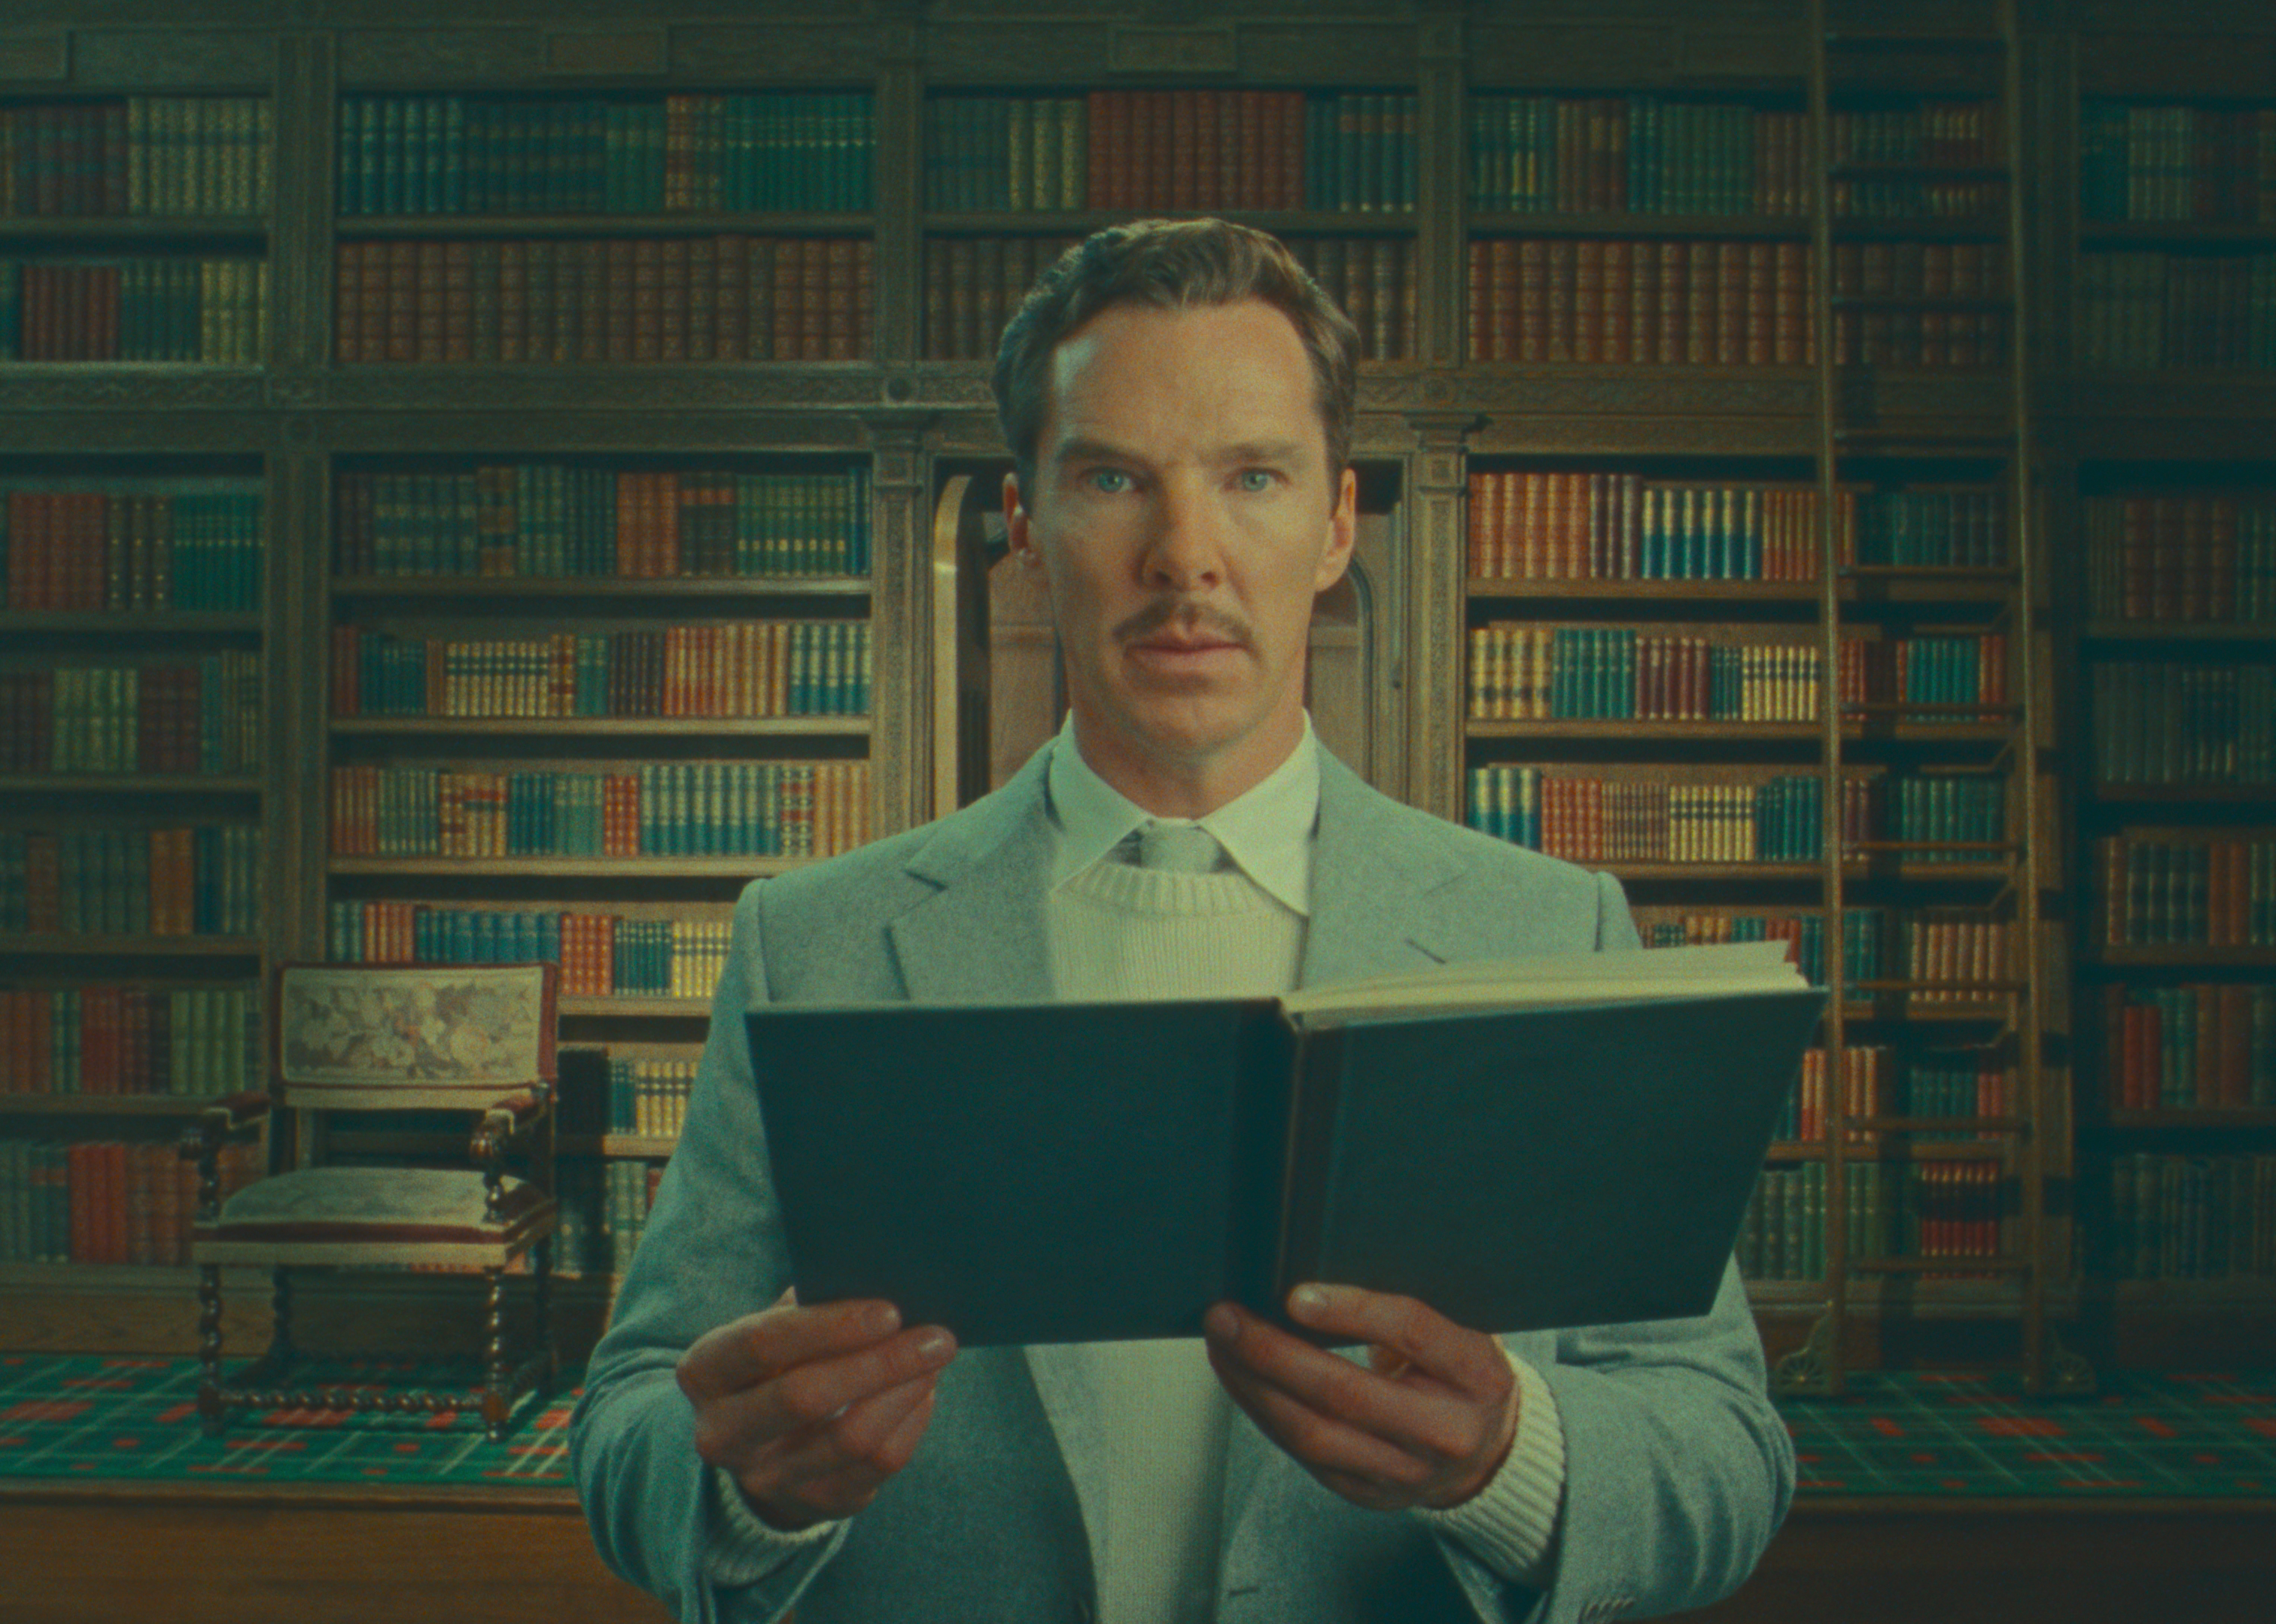 Benedict Cumberbatch, standing in a room lined ceiling to floor with books, stares directly into the camera while holding up another book in Wes Anderson’s Netflix film The Wonderful Story of Henry Sugar